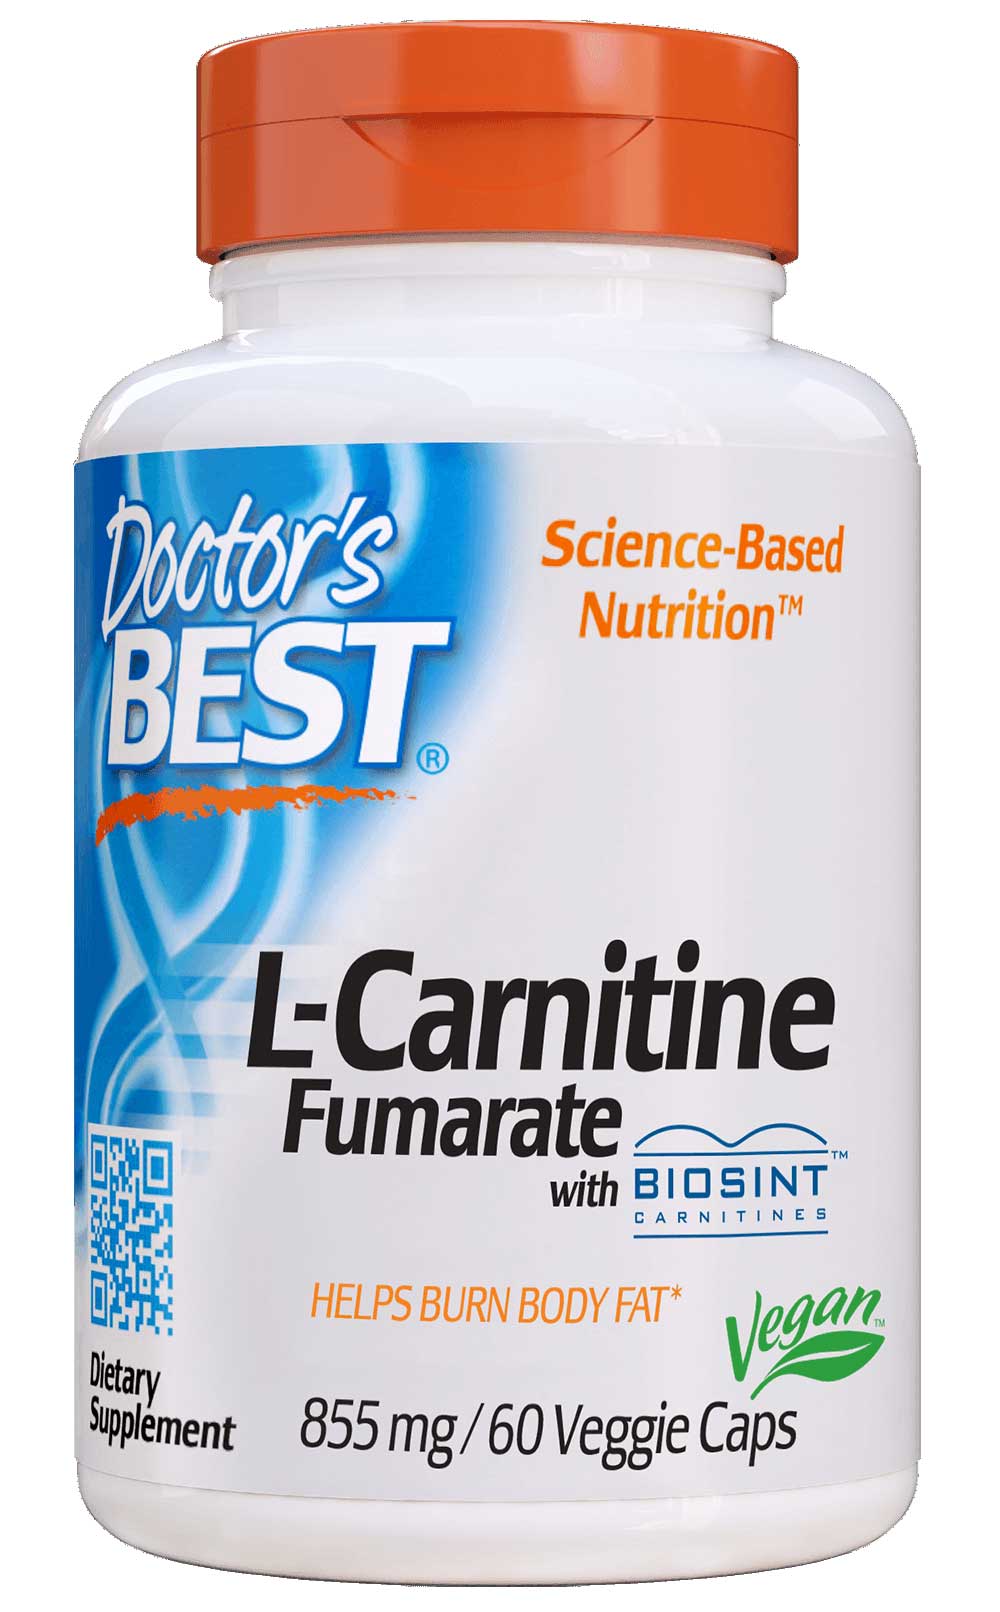 Doctor's Best L-Carnitine Fumarate with Biosint™ Carnitines 855 mg